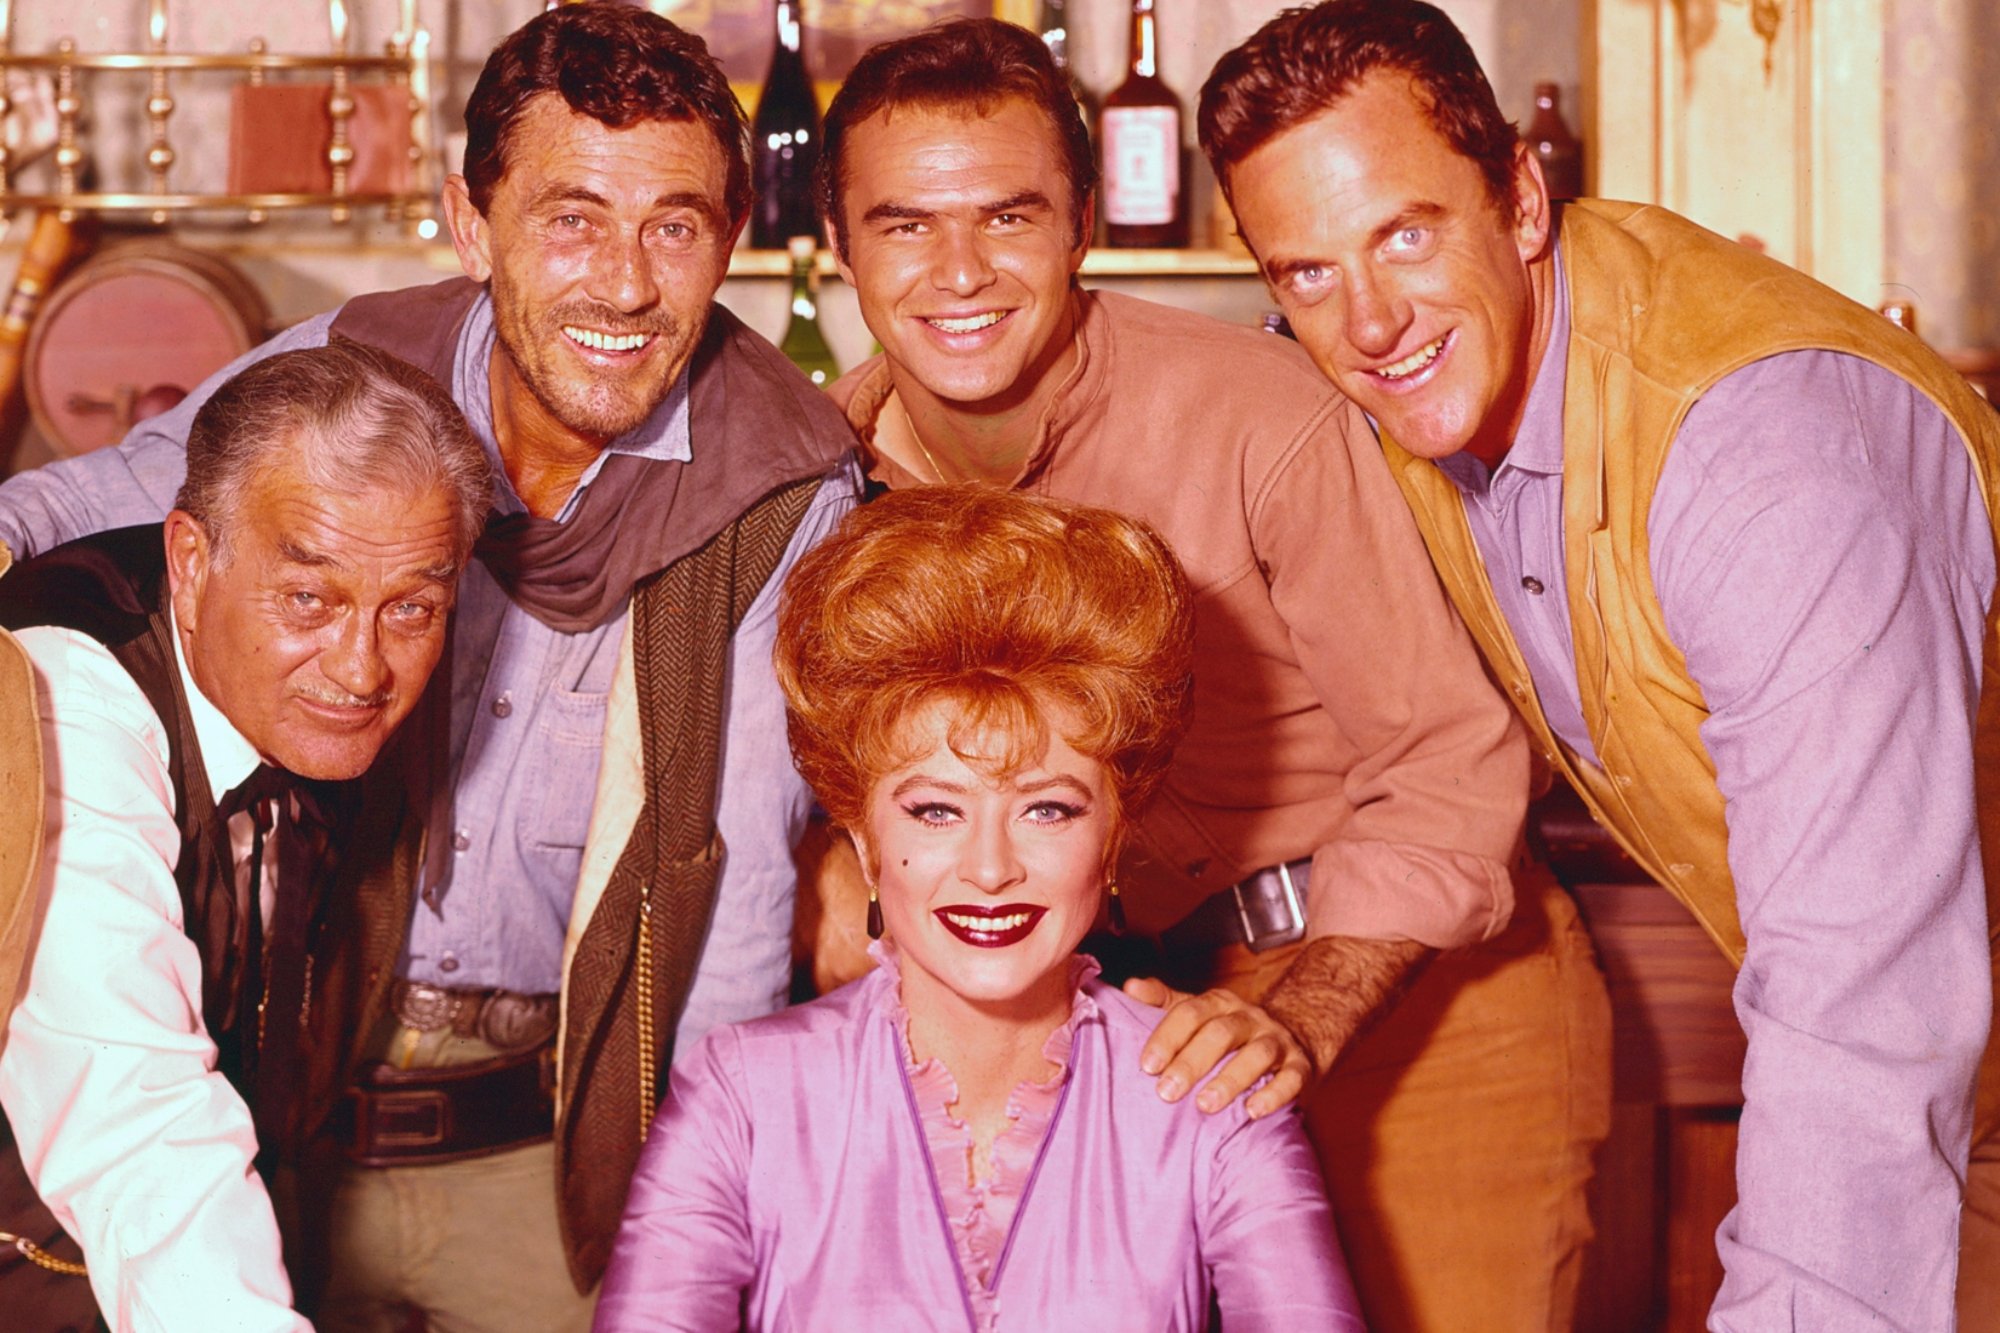 ‘Gunsmoke’: Did Burt Reynolds Get Along With James Arness and the Rest of the Cast?